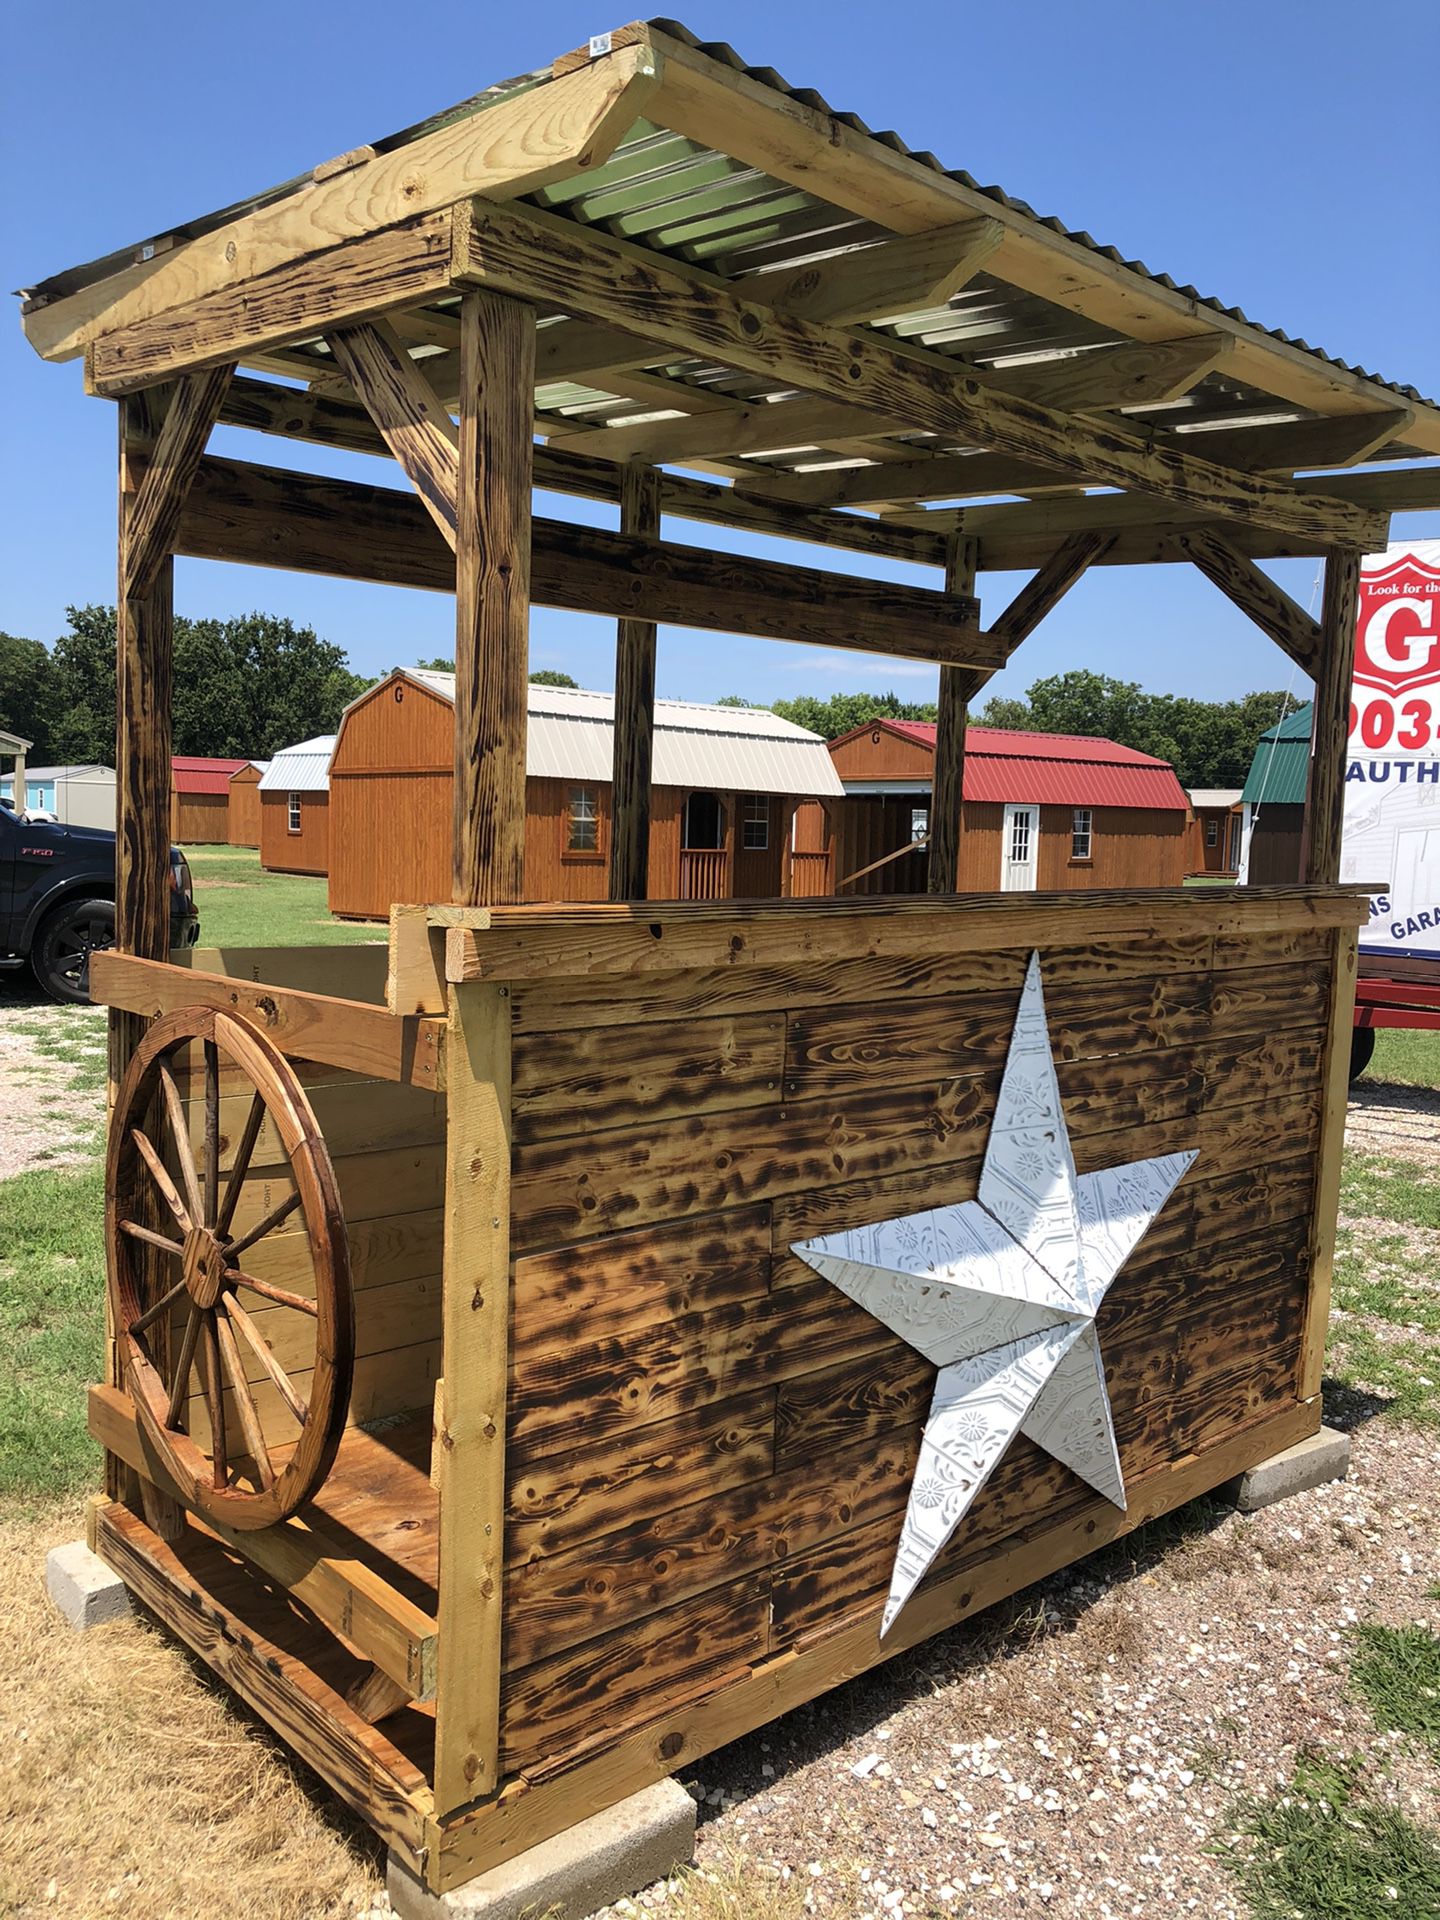 Entertainment Shack Great For Having Gatherings With Family And Friends All New Treated Wood Stained And Burned Too 